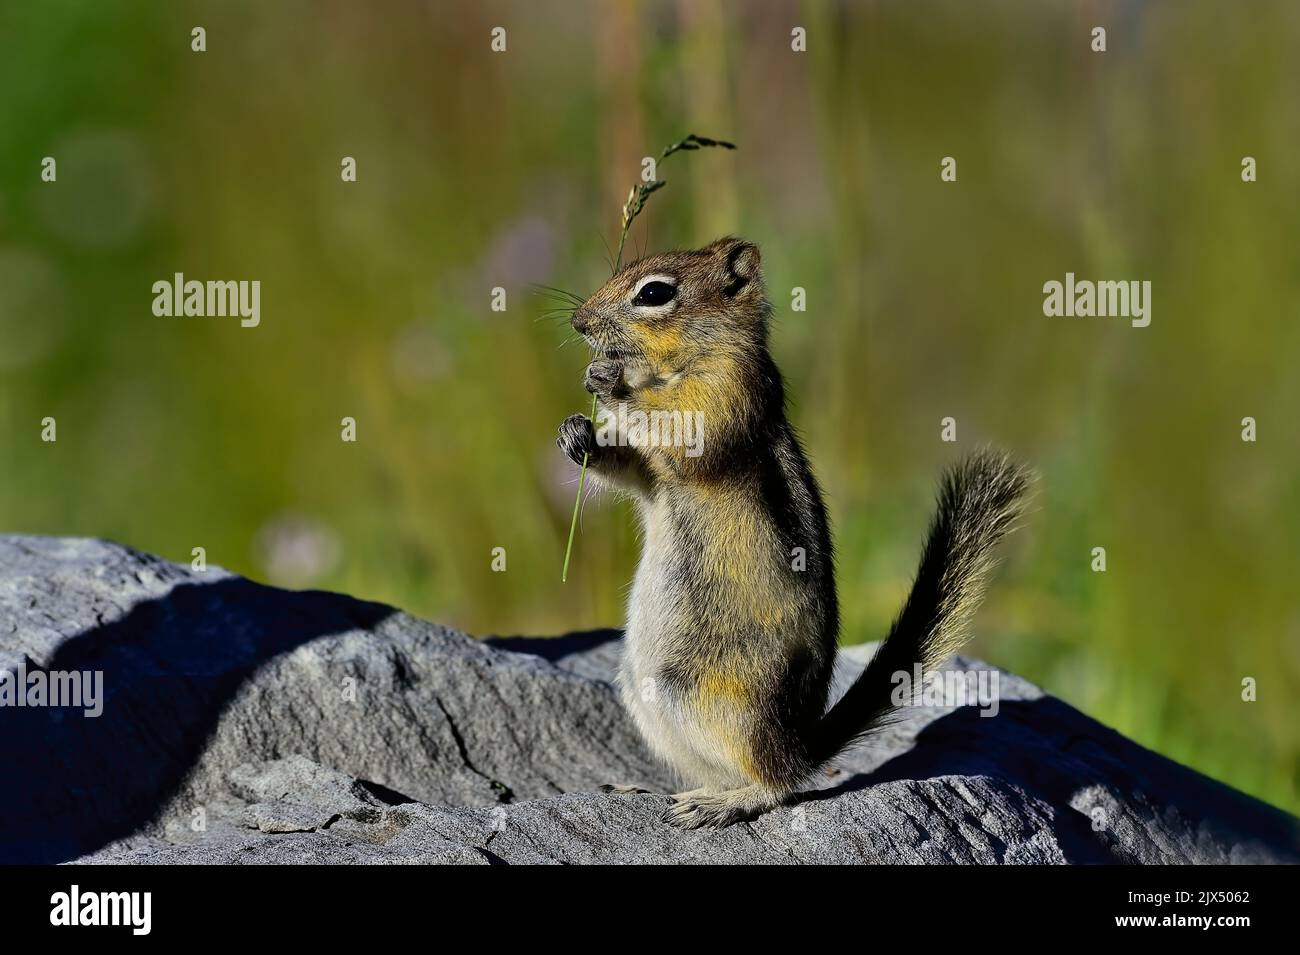 A Golden-mantled ground squirrel ' Callospermophilus lateralis', standing on a large rock eating a blade of green grass in rural Alberta Canada. Stock Photo